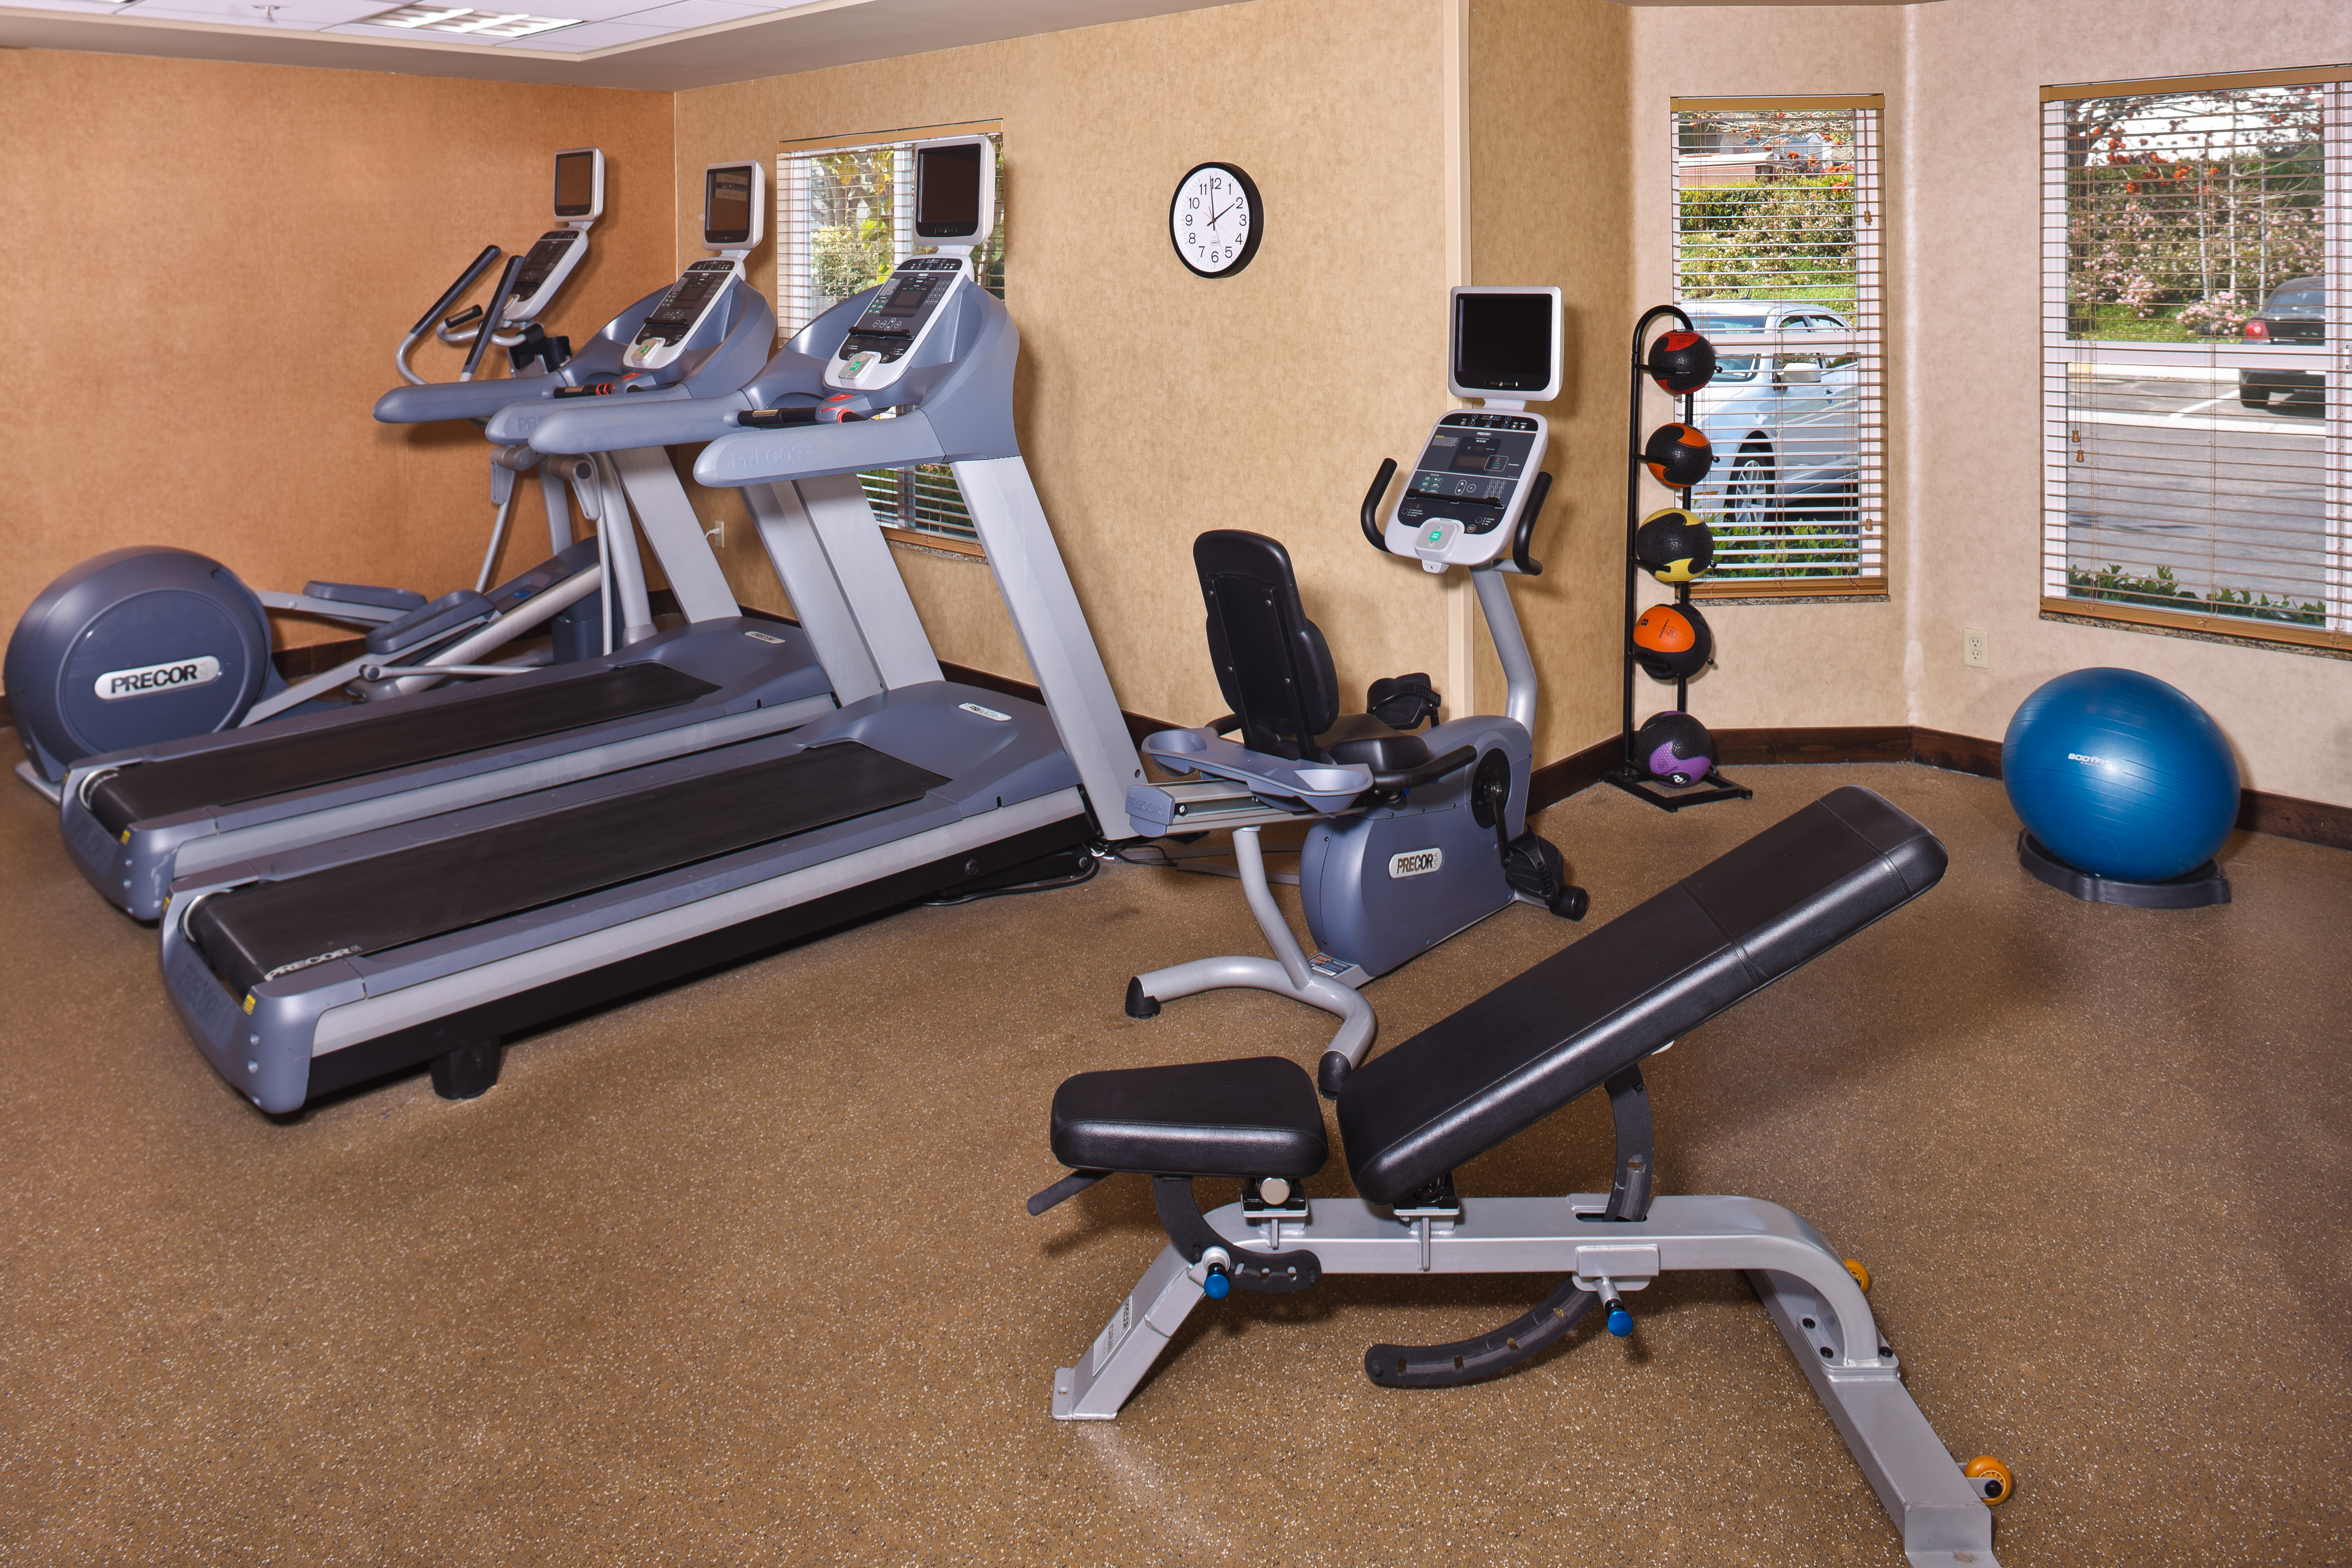 Fitness & Recreation While You're In Town